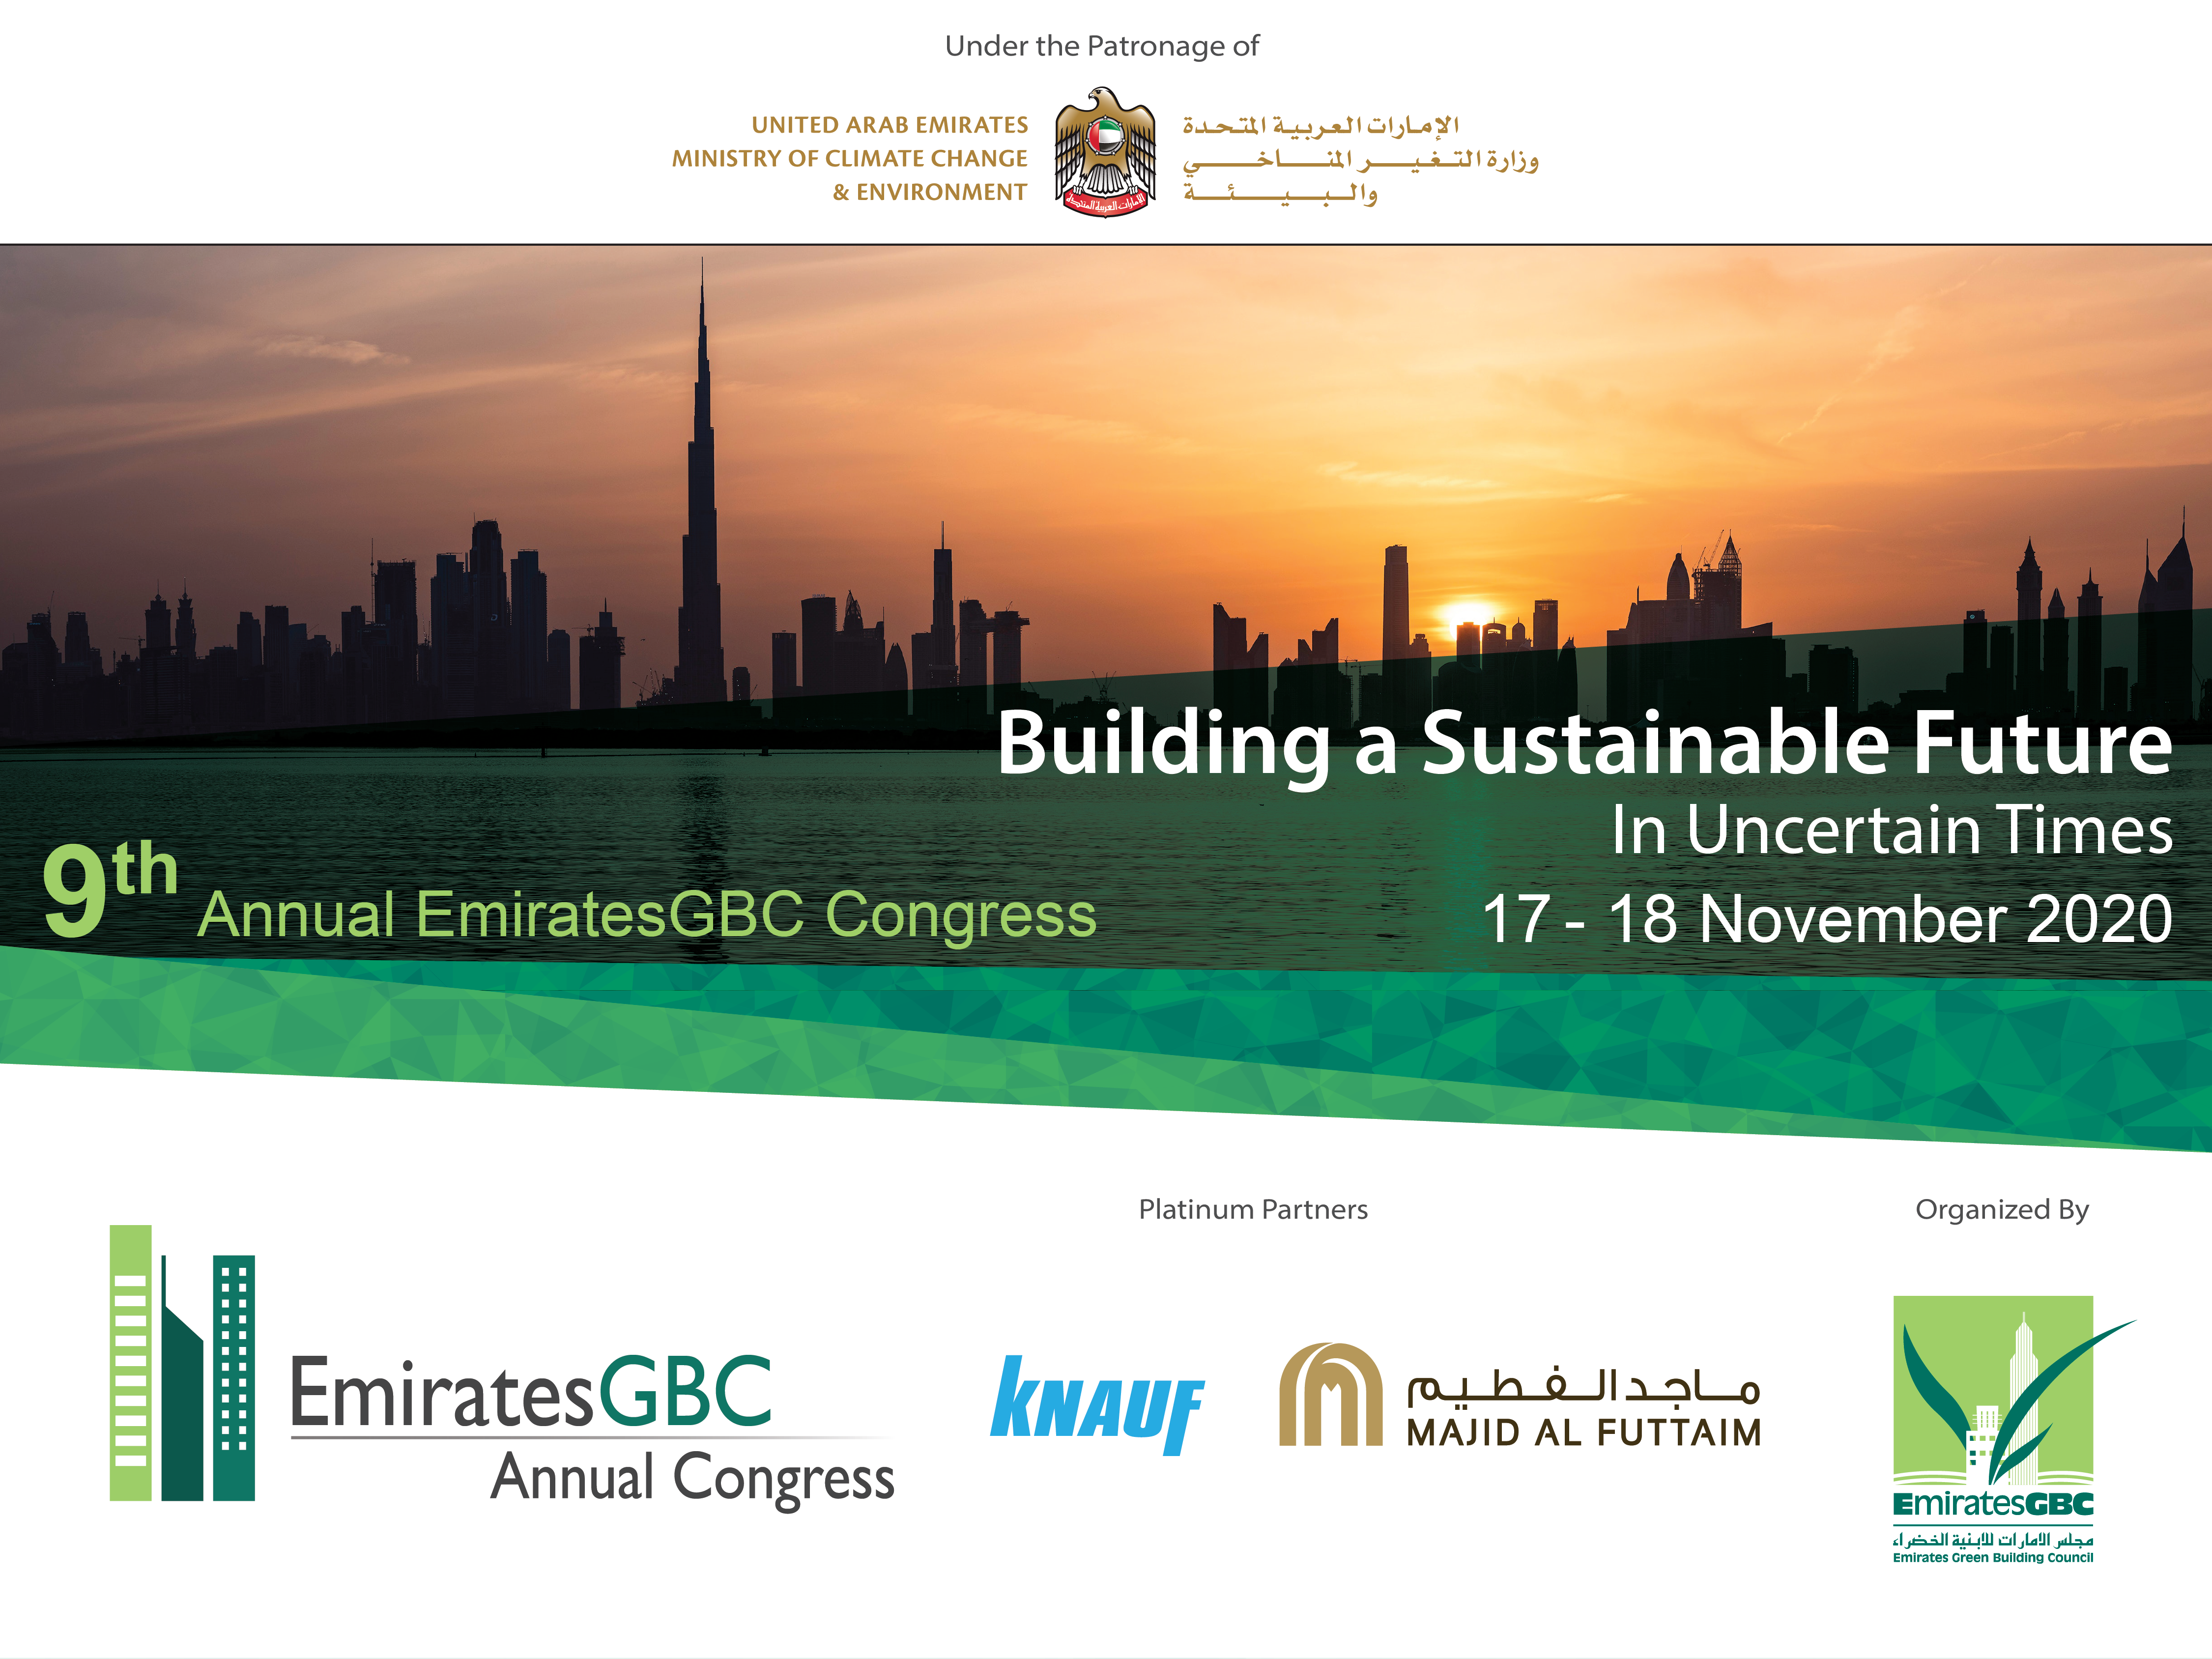 Sheikha Shamma to inaugurate the Annual Emirates Green Building Council Congress, held under the patronage of the UAE Ministry of Climate Change and Environment